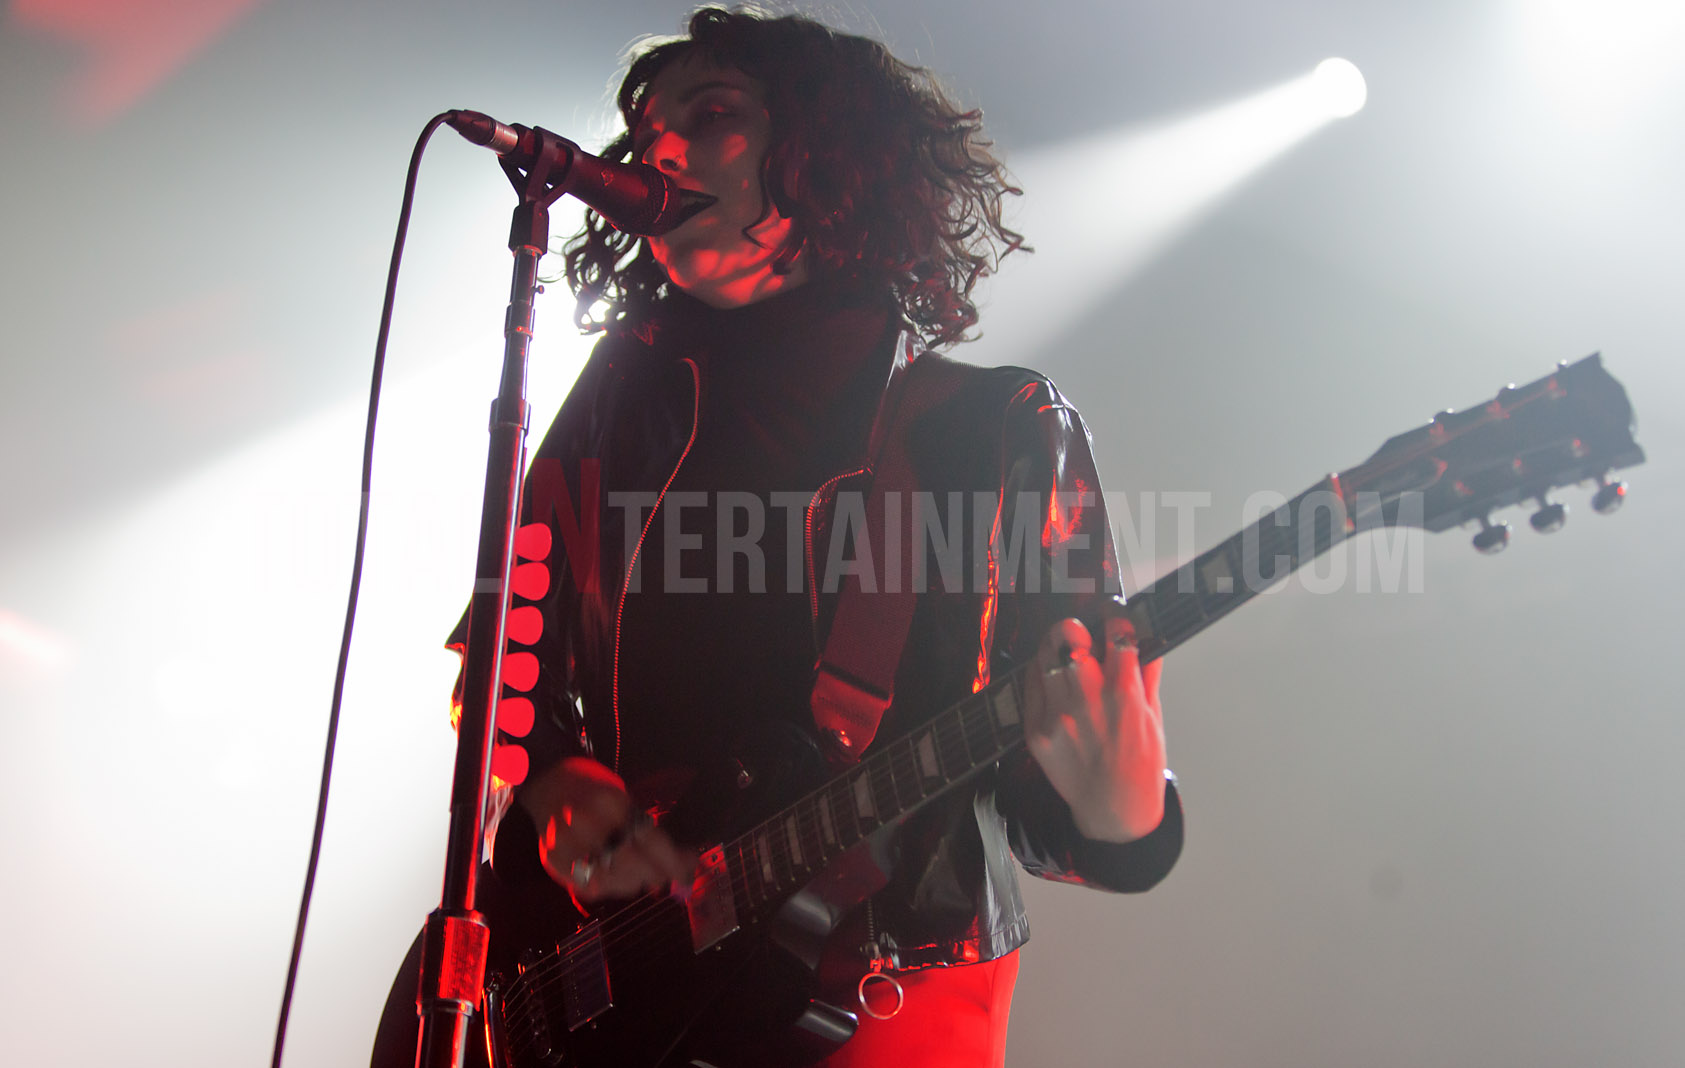 Pale Waves, Manchester, Jo Forrest, Stuart Houghton, TotalNtertainment, Review